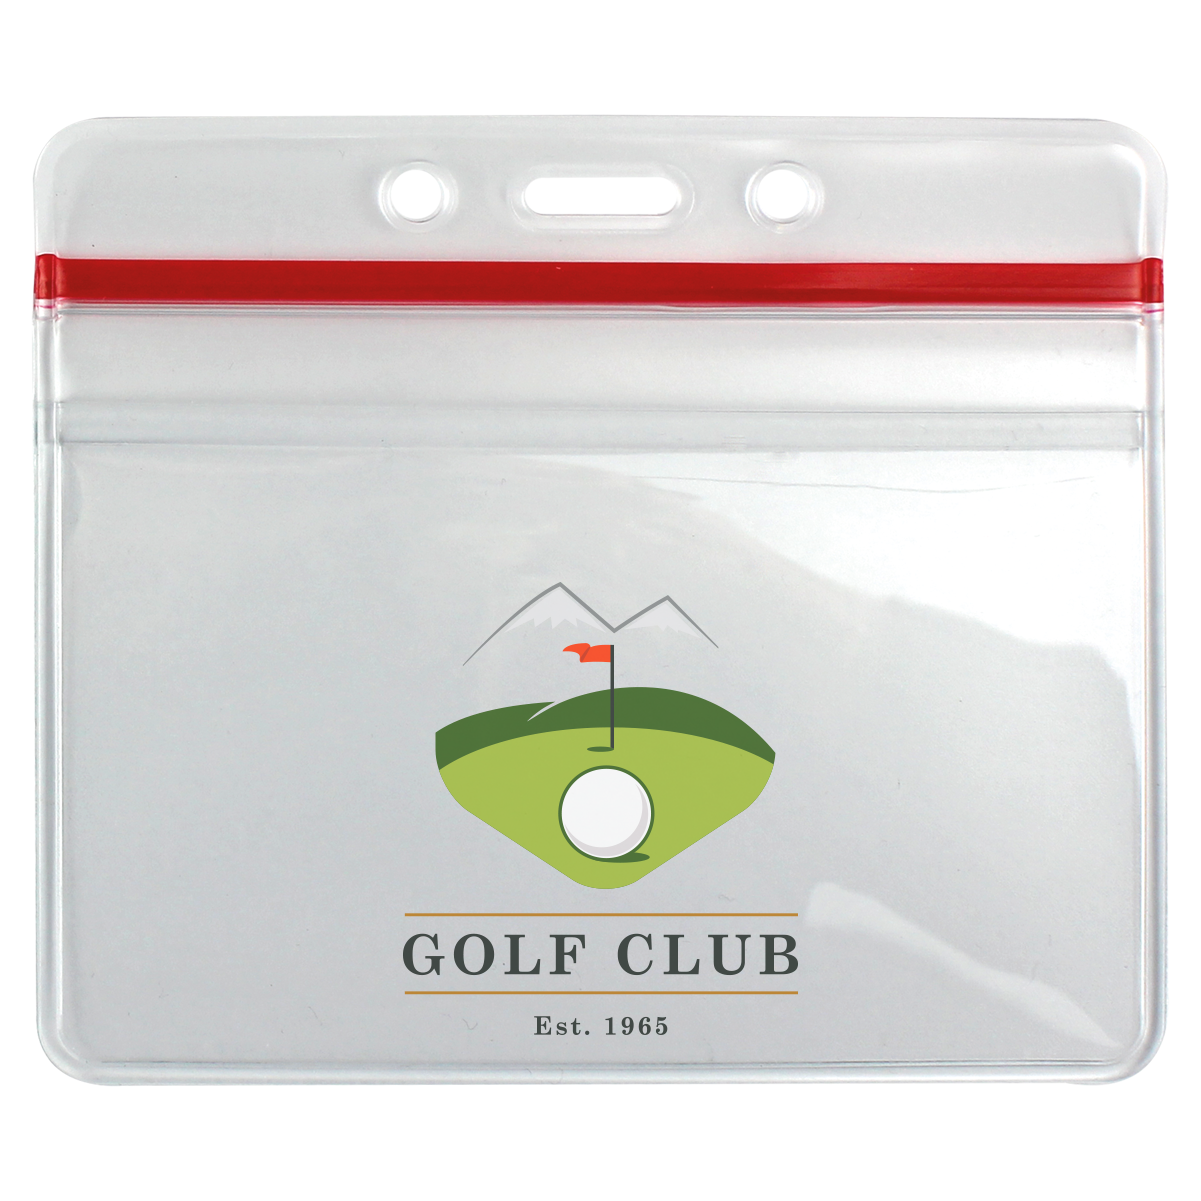 A Custom Heavy Duty Clear Vinyl Horizontal Badge Holder With Resealable Top (1815-1010), featuring a Golf Club logo, a green with a flag, and the text "Golf Club Est. 1965" at the bottom.